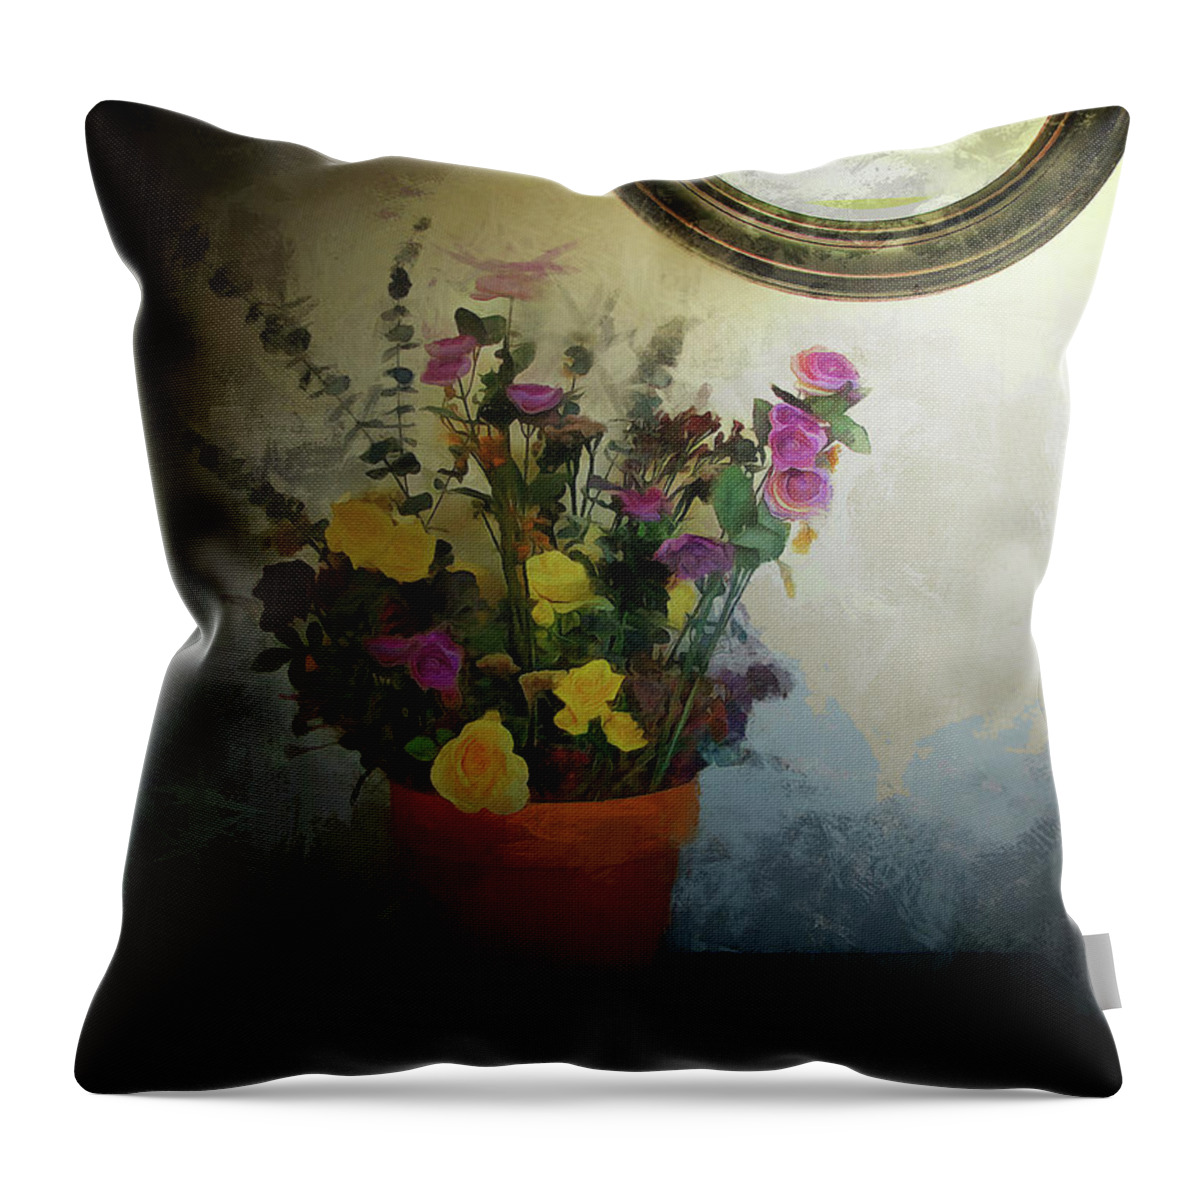 Cedric Hampton Throw Pillow featuring the photograph Potted Flowers 2 by Cedric Hampton